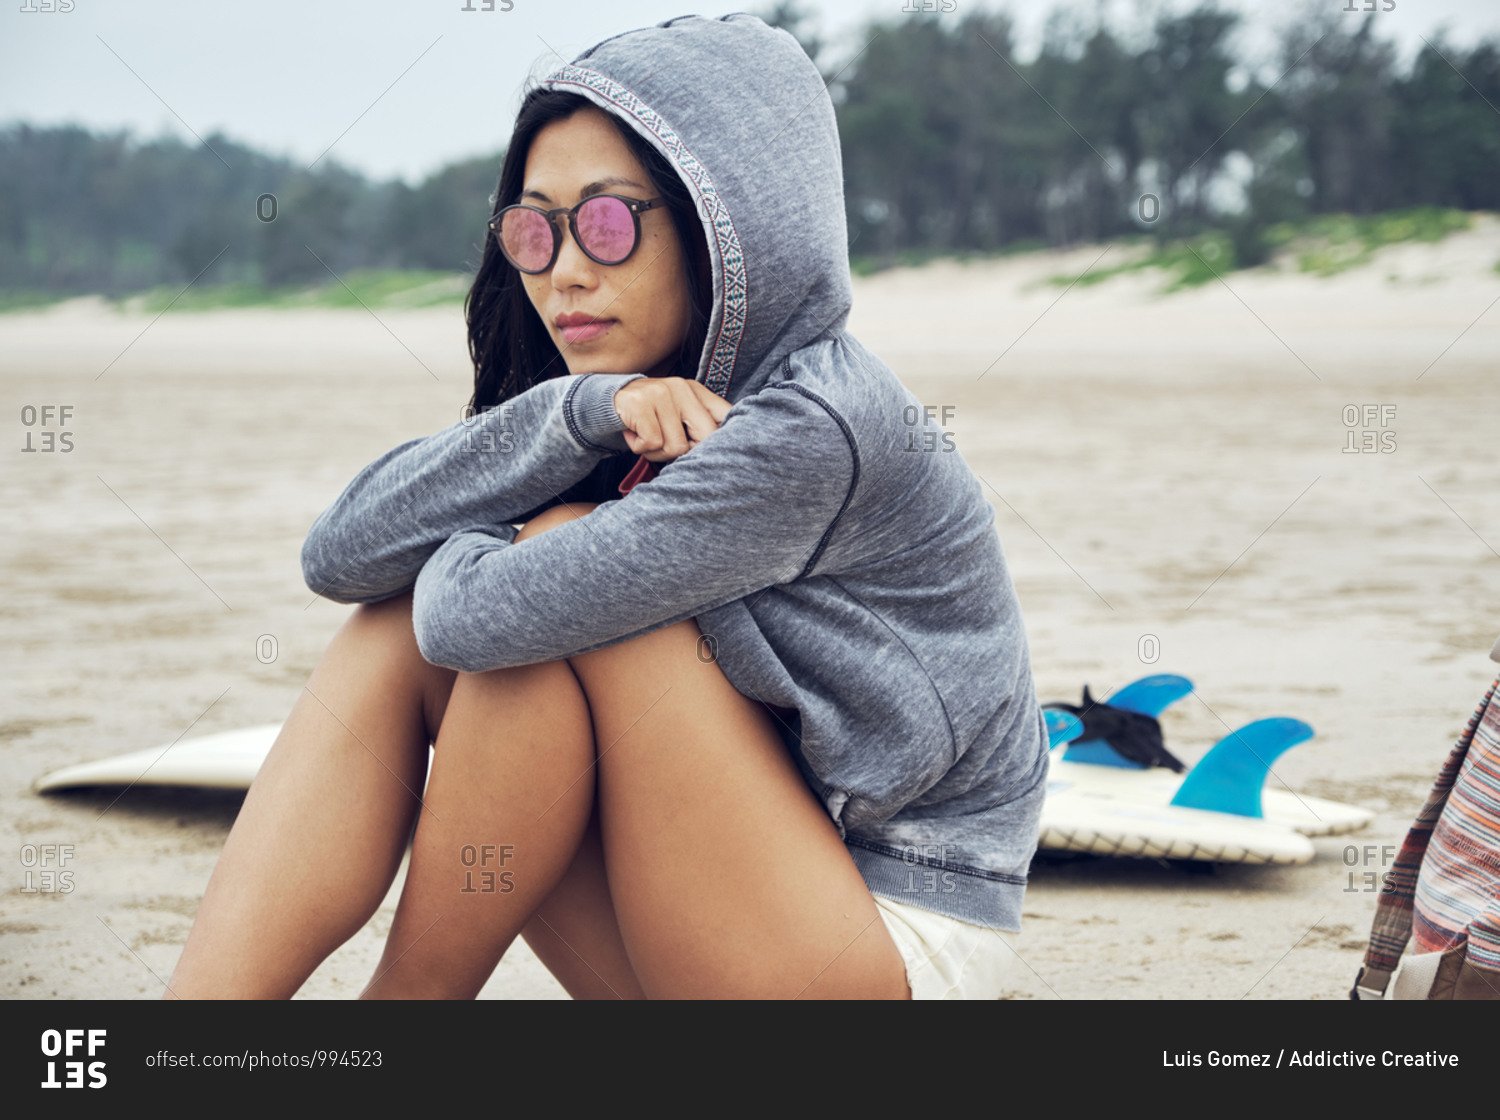 Crop contemplate Asian female in hoodie and sunglasses sitting on sandy beach near surfboard and looking away thoughtfully